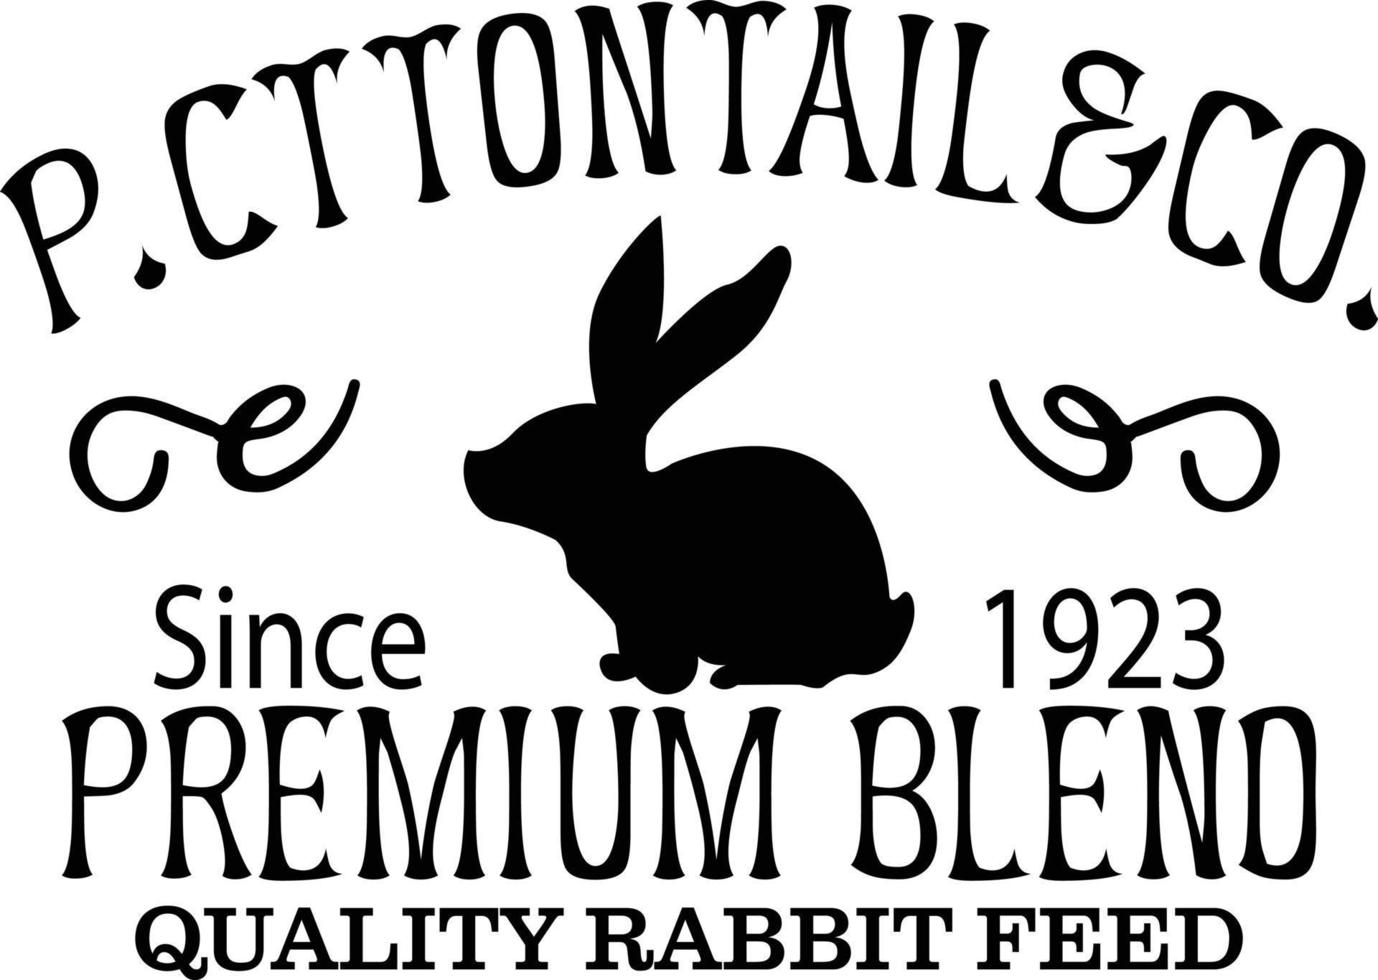 P.cttontailco. since 1923 premium blend quality rabbit feed vector